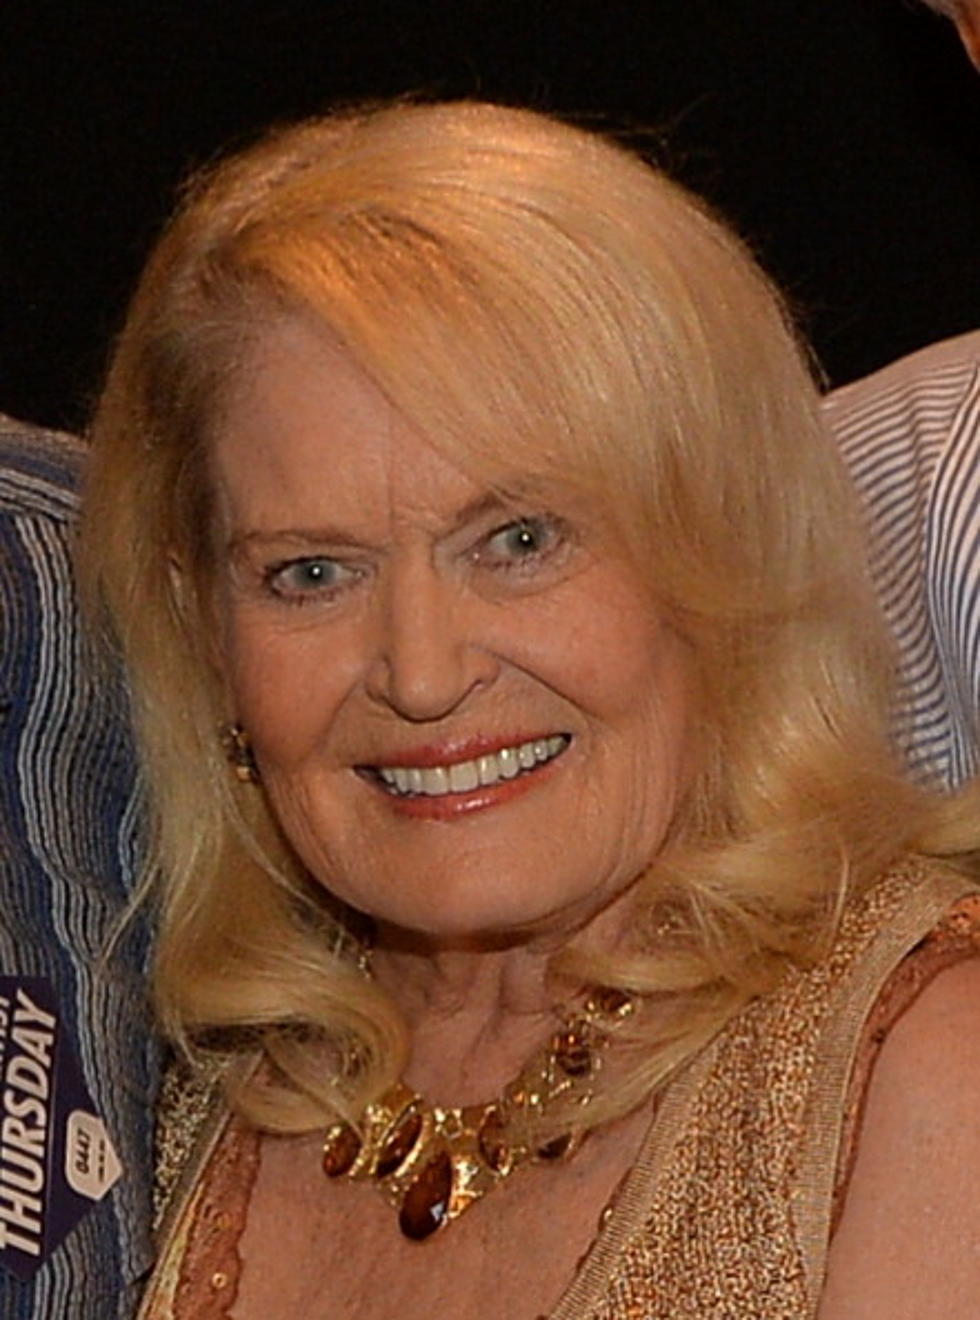 &#8216;Rose Garden&#8217; Singer and Country Legend Lynn Anderson Passes Away at 67